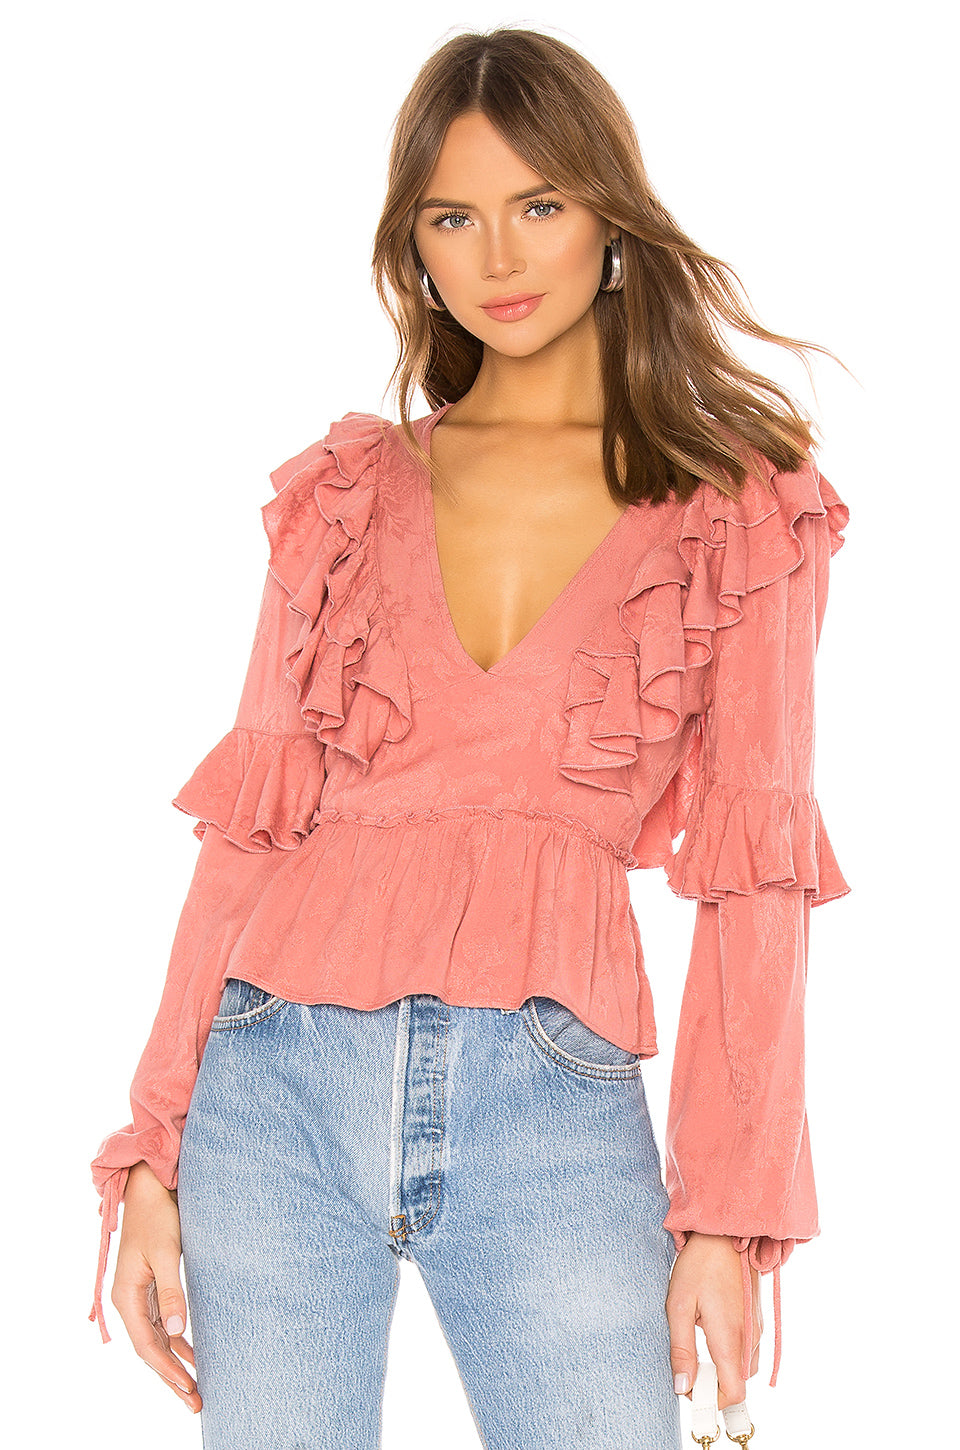 Mabel Top in DUSTY ROSE